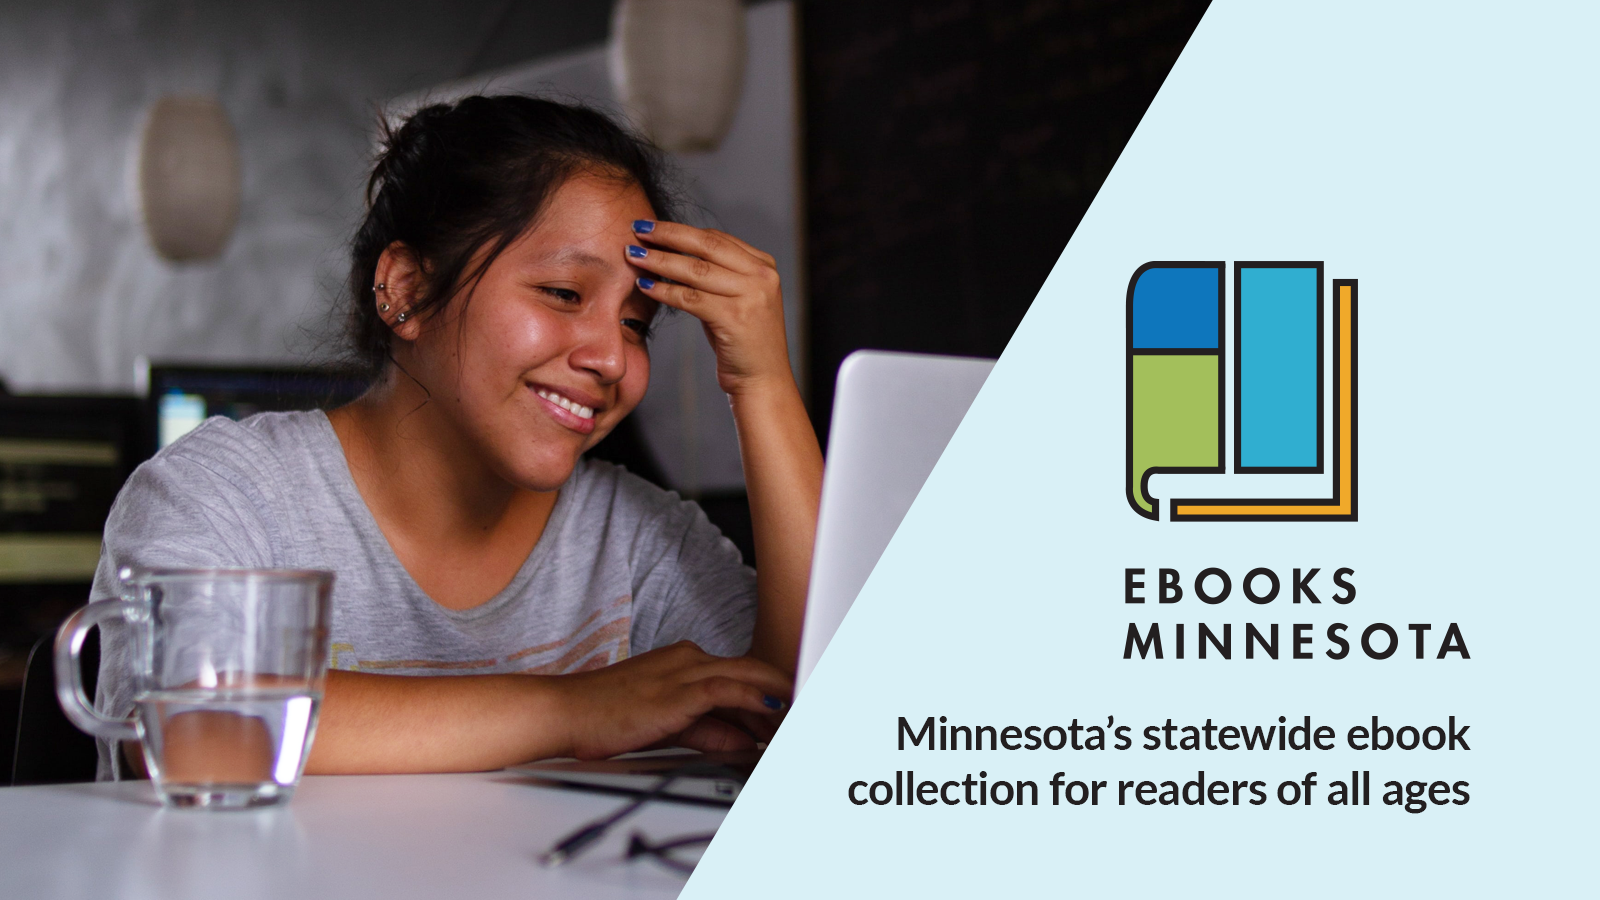 A photo of a student at a computer, with the Ebooks Minnesota and text that reads "Minnesota's statewide ebook collection for readers of all ages"